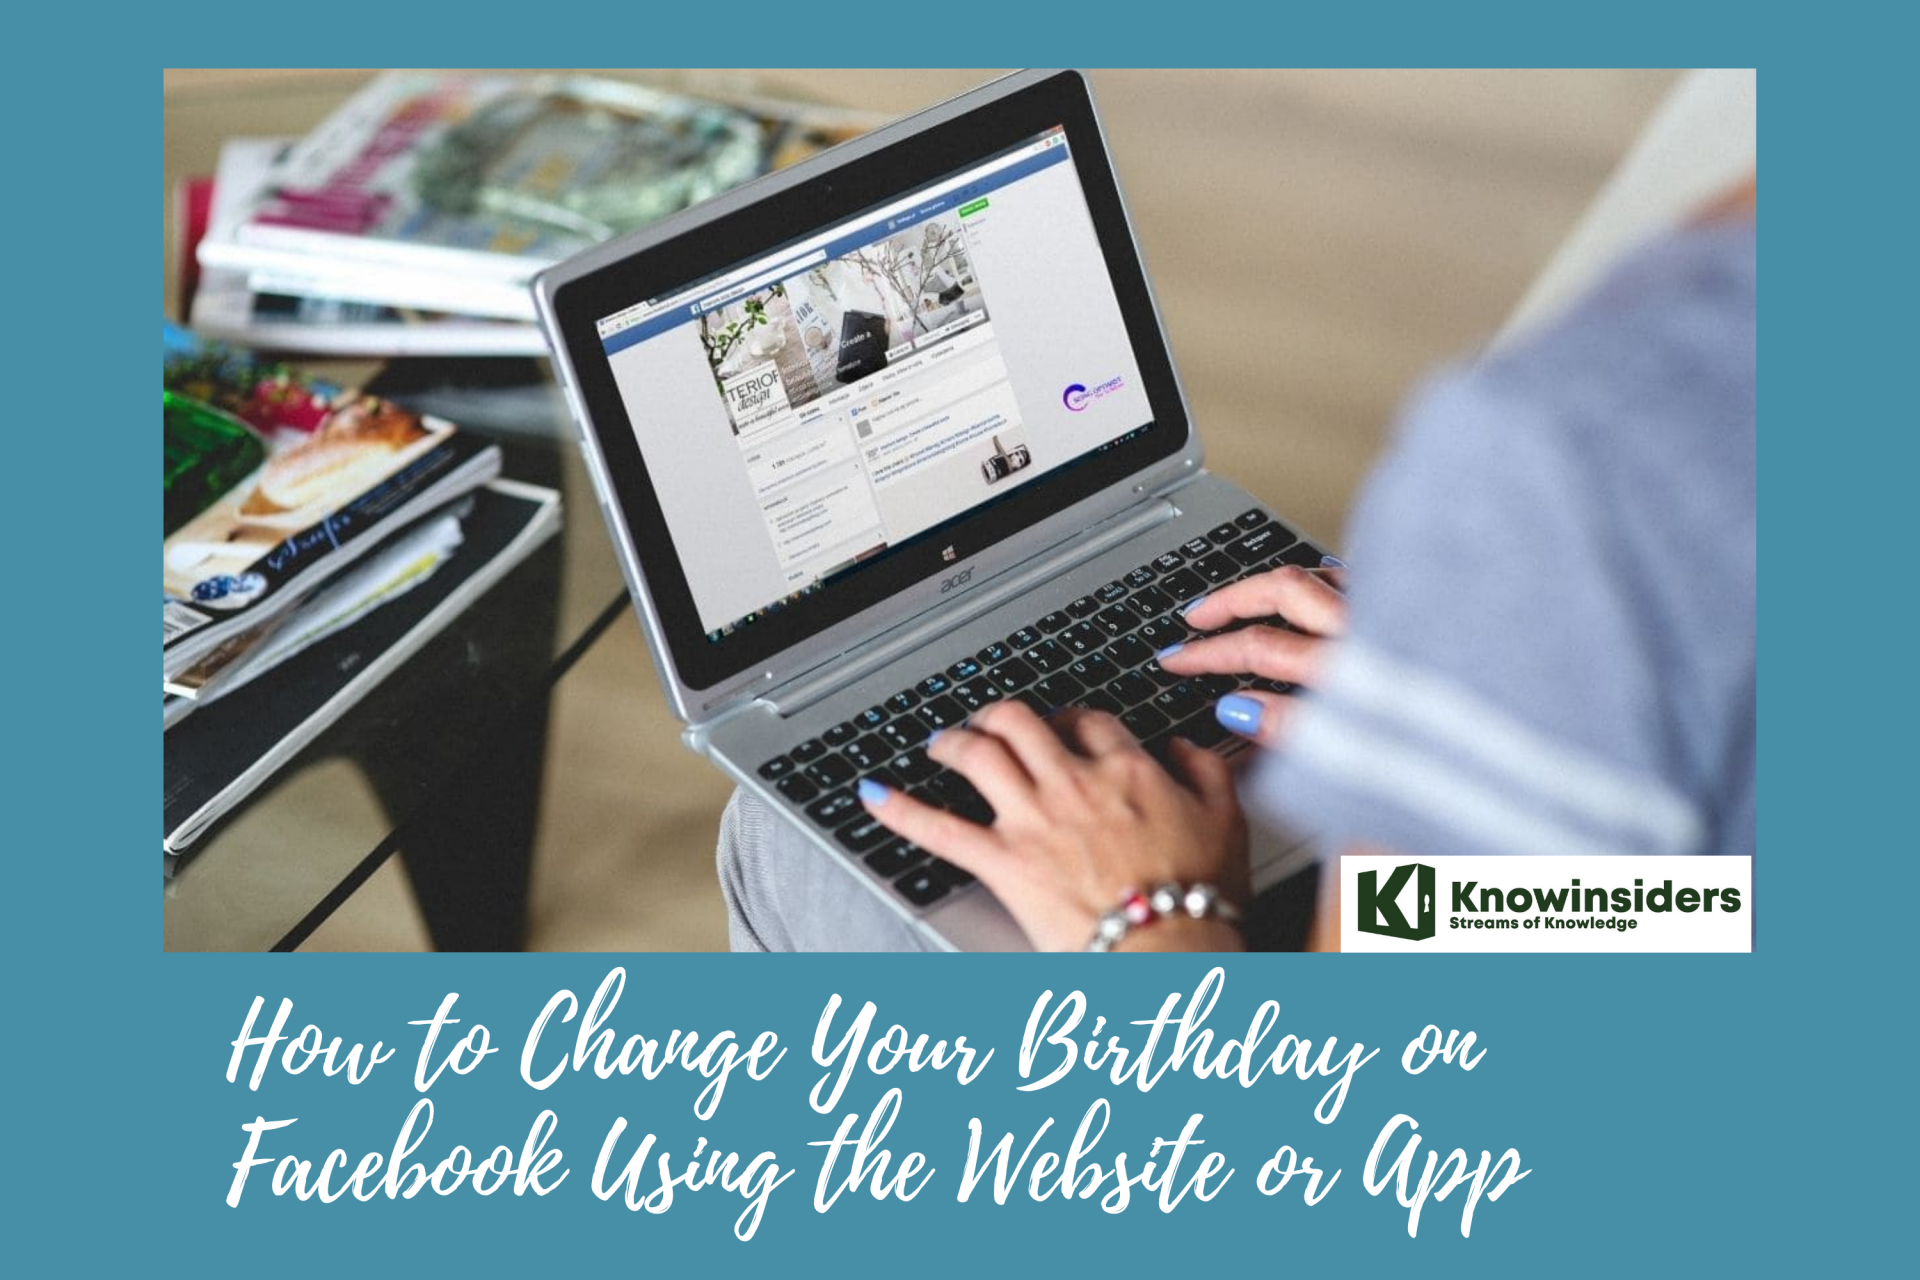 How to Change Your Birthday on Facebook Using the Website or App